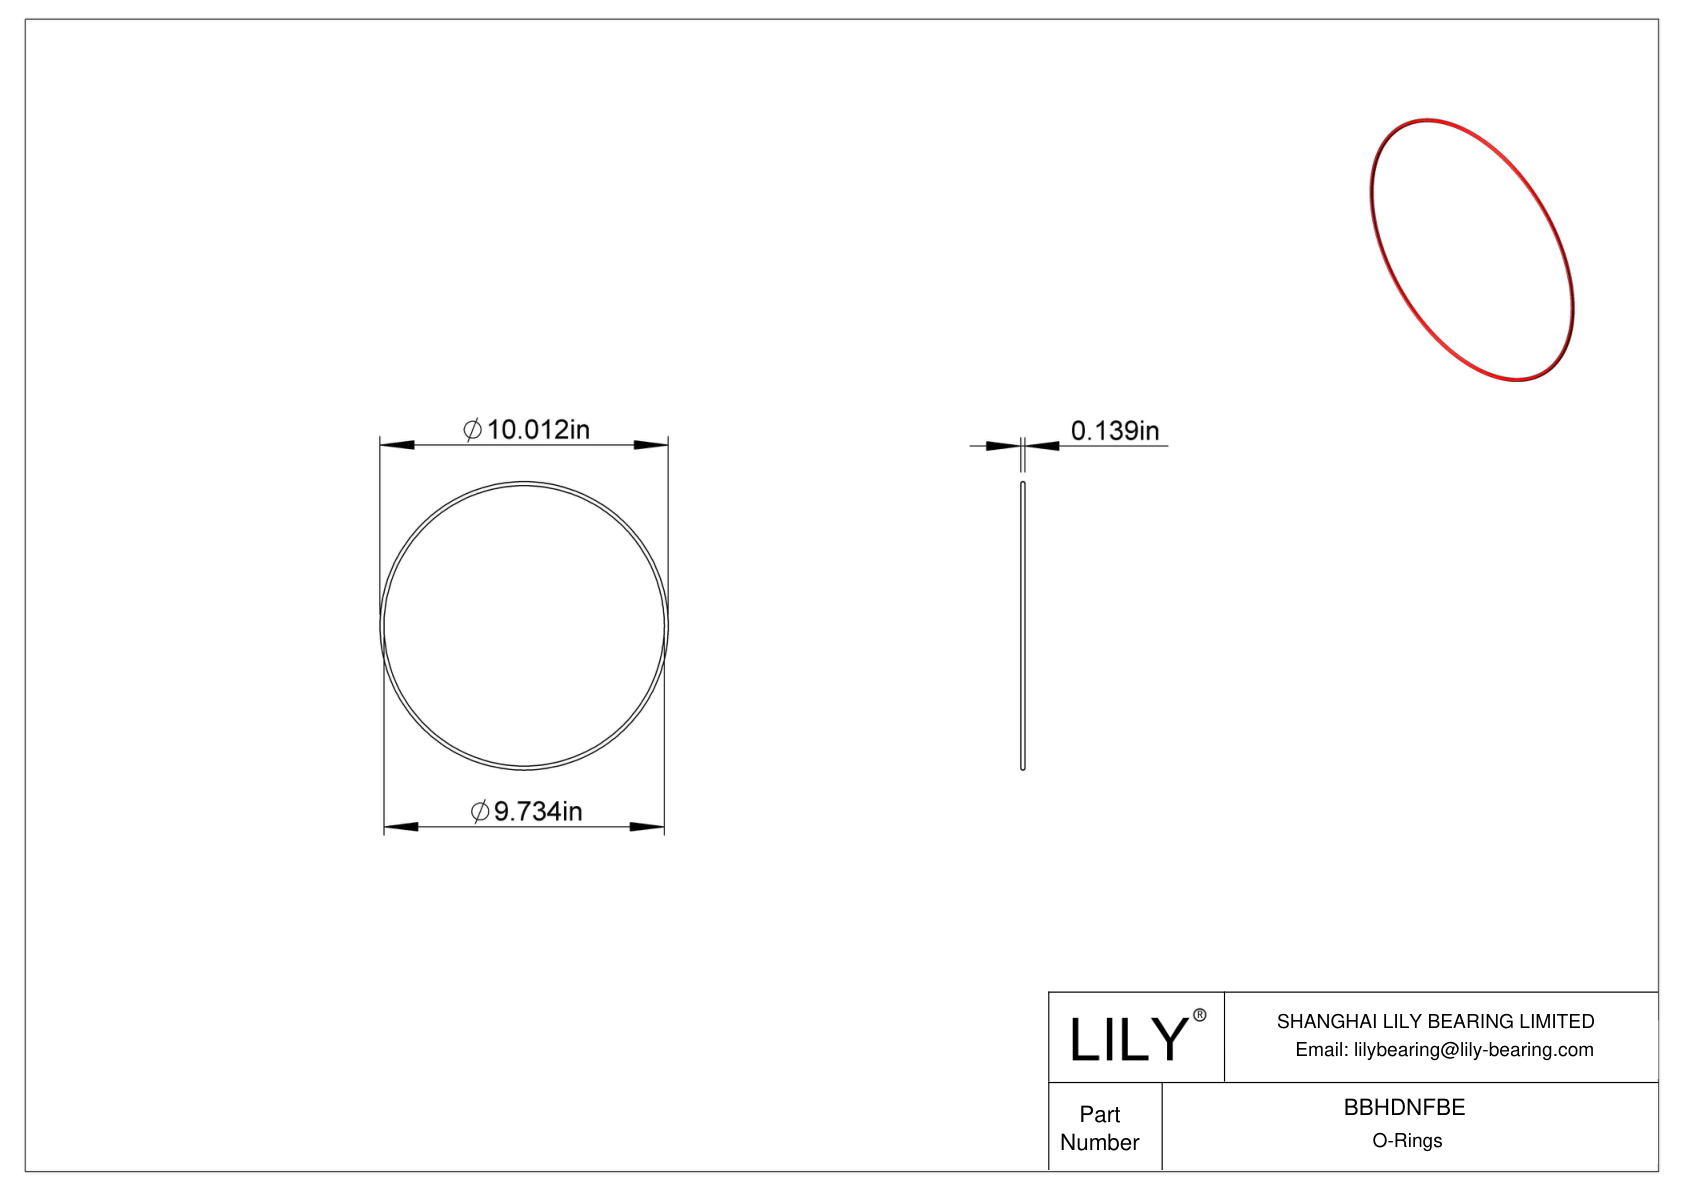 BBHDNFBE High Temperature O-Rings Round cad drawing